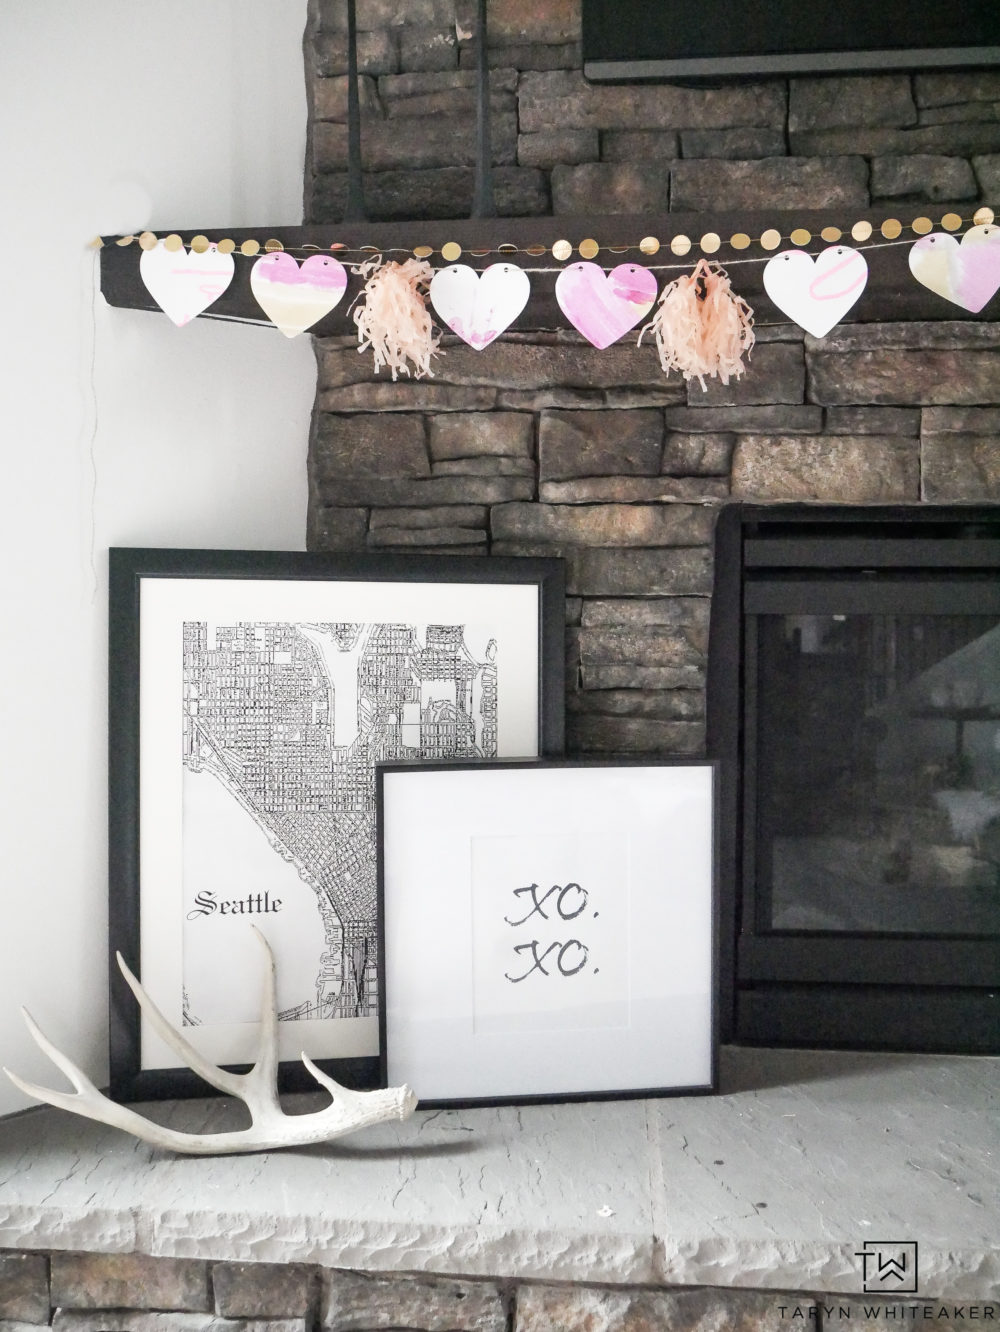 Learn how to create this Simple Valentine's Day Mantel using your kids' artwork! It's always fun to add a little festive cheer to your home especially with handmade art!